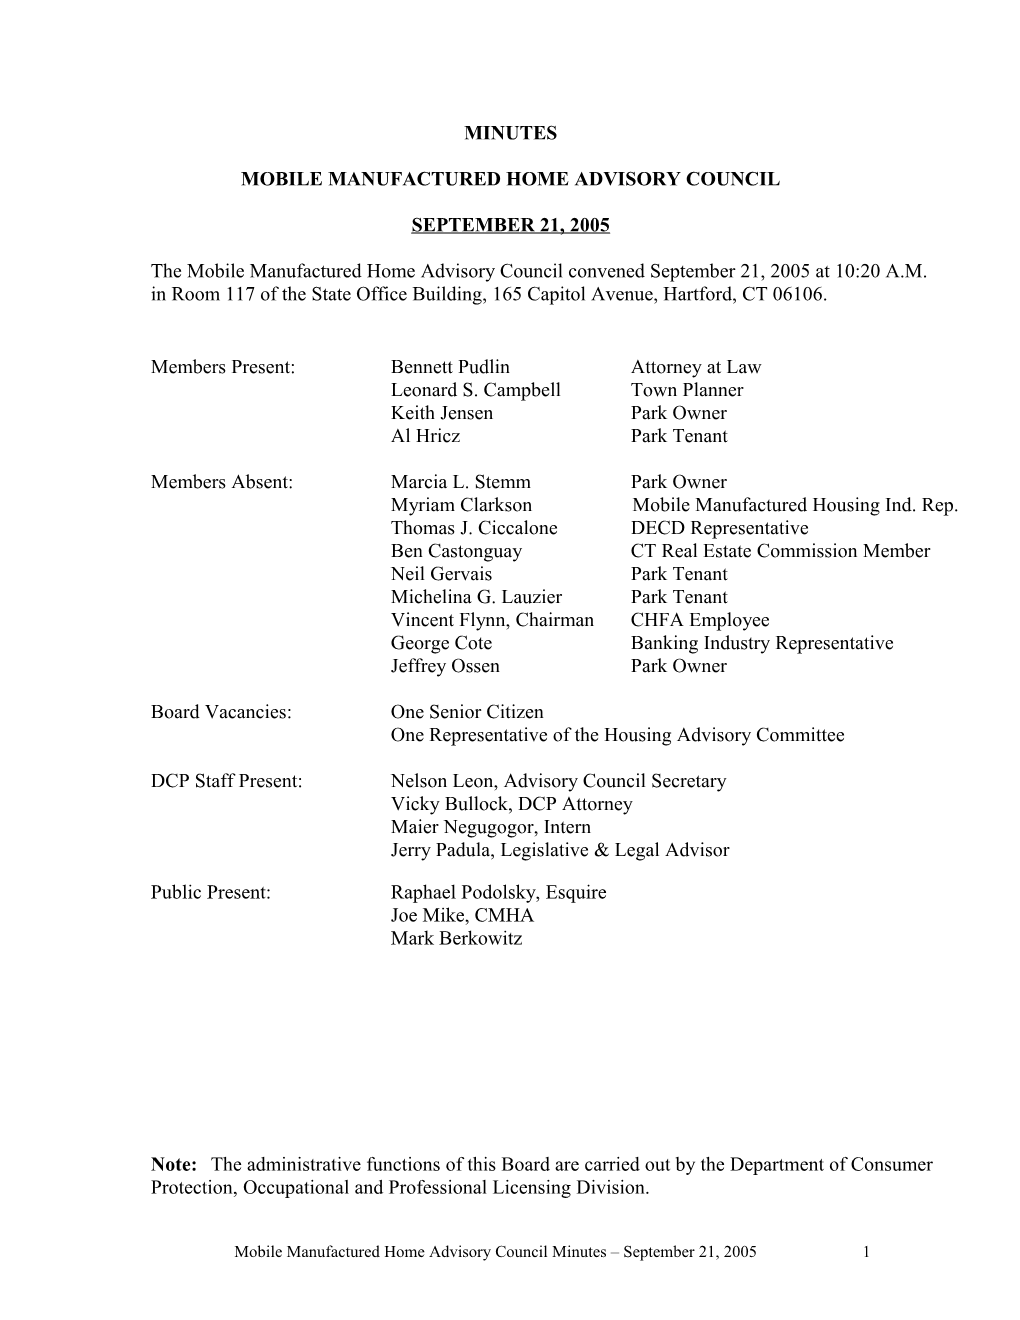 Mobile Manufactured Home Advisory Council